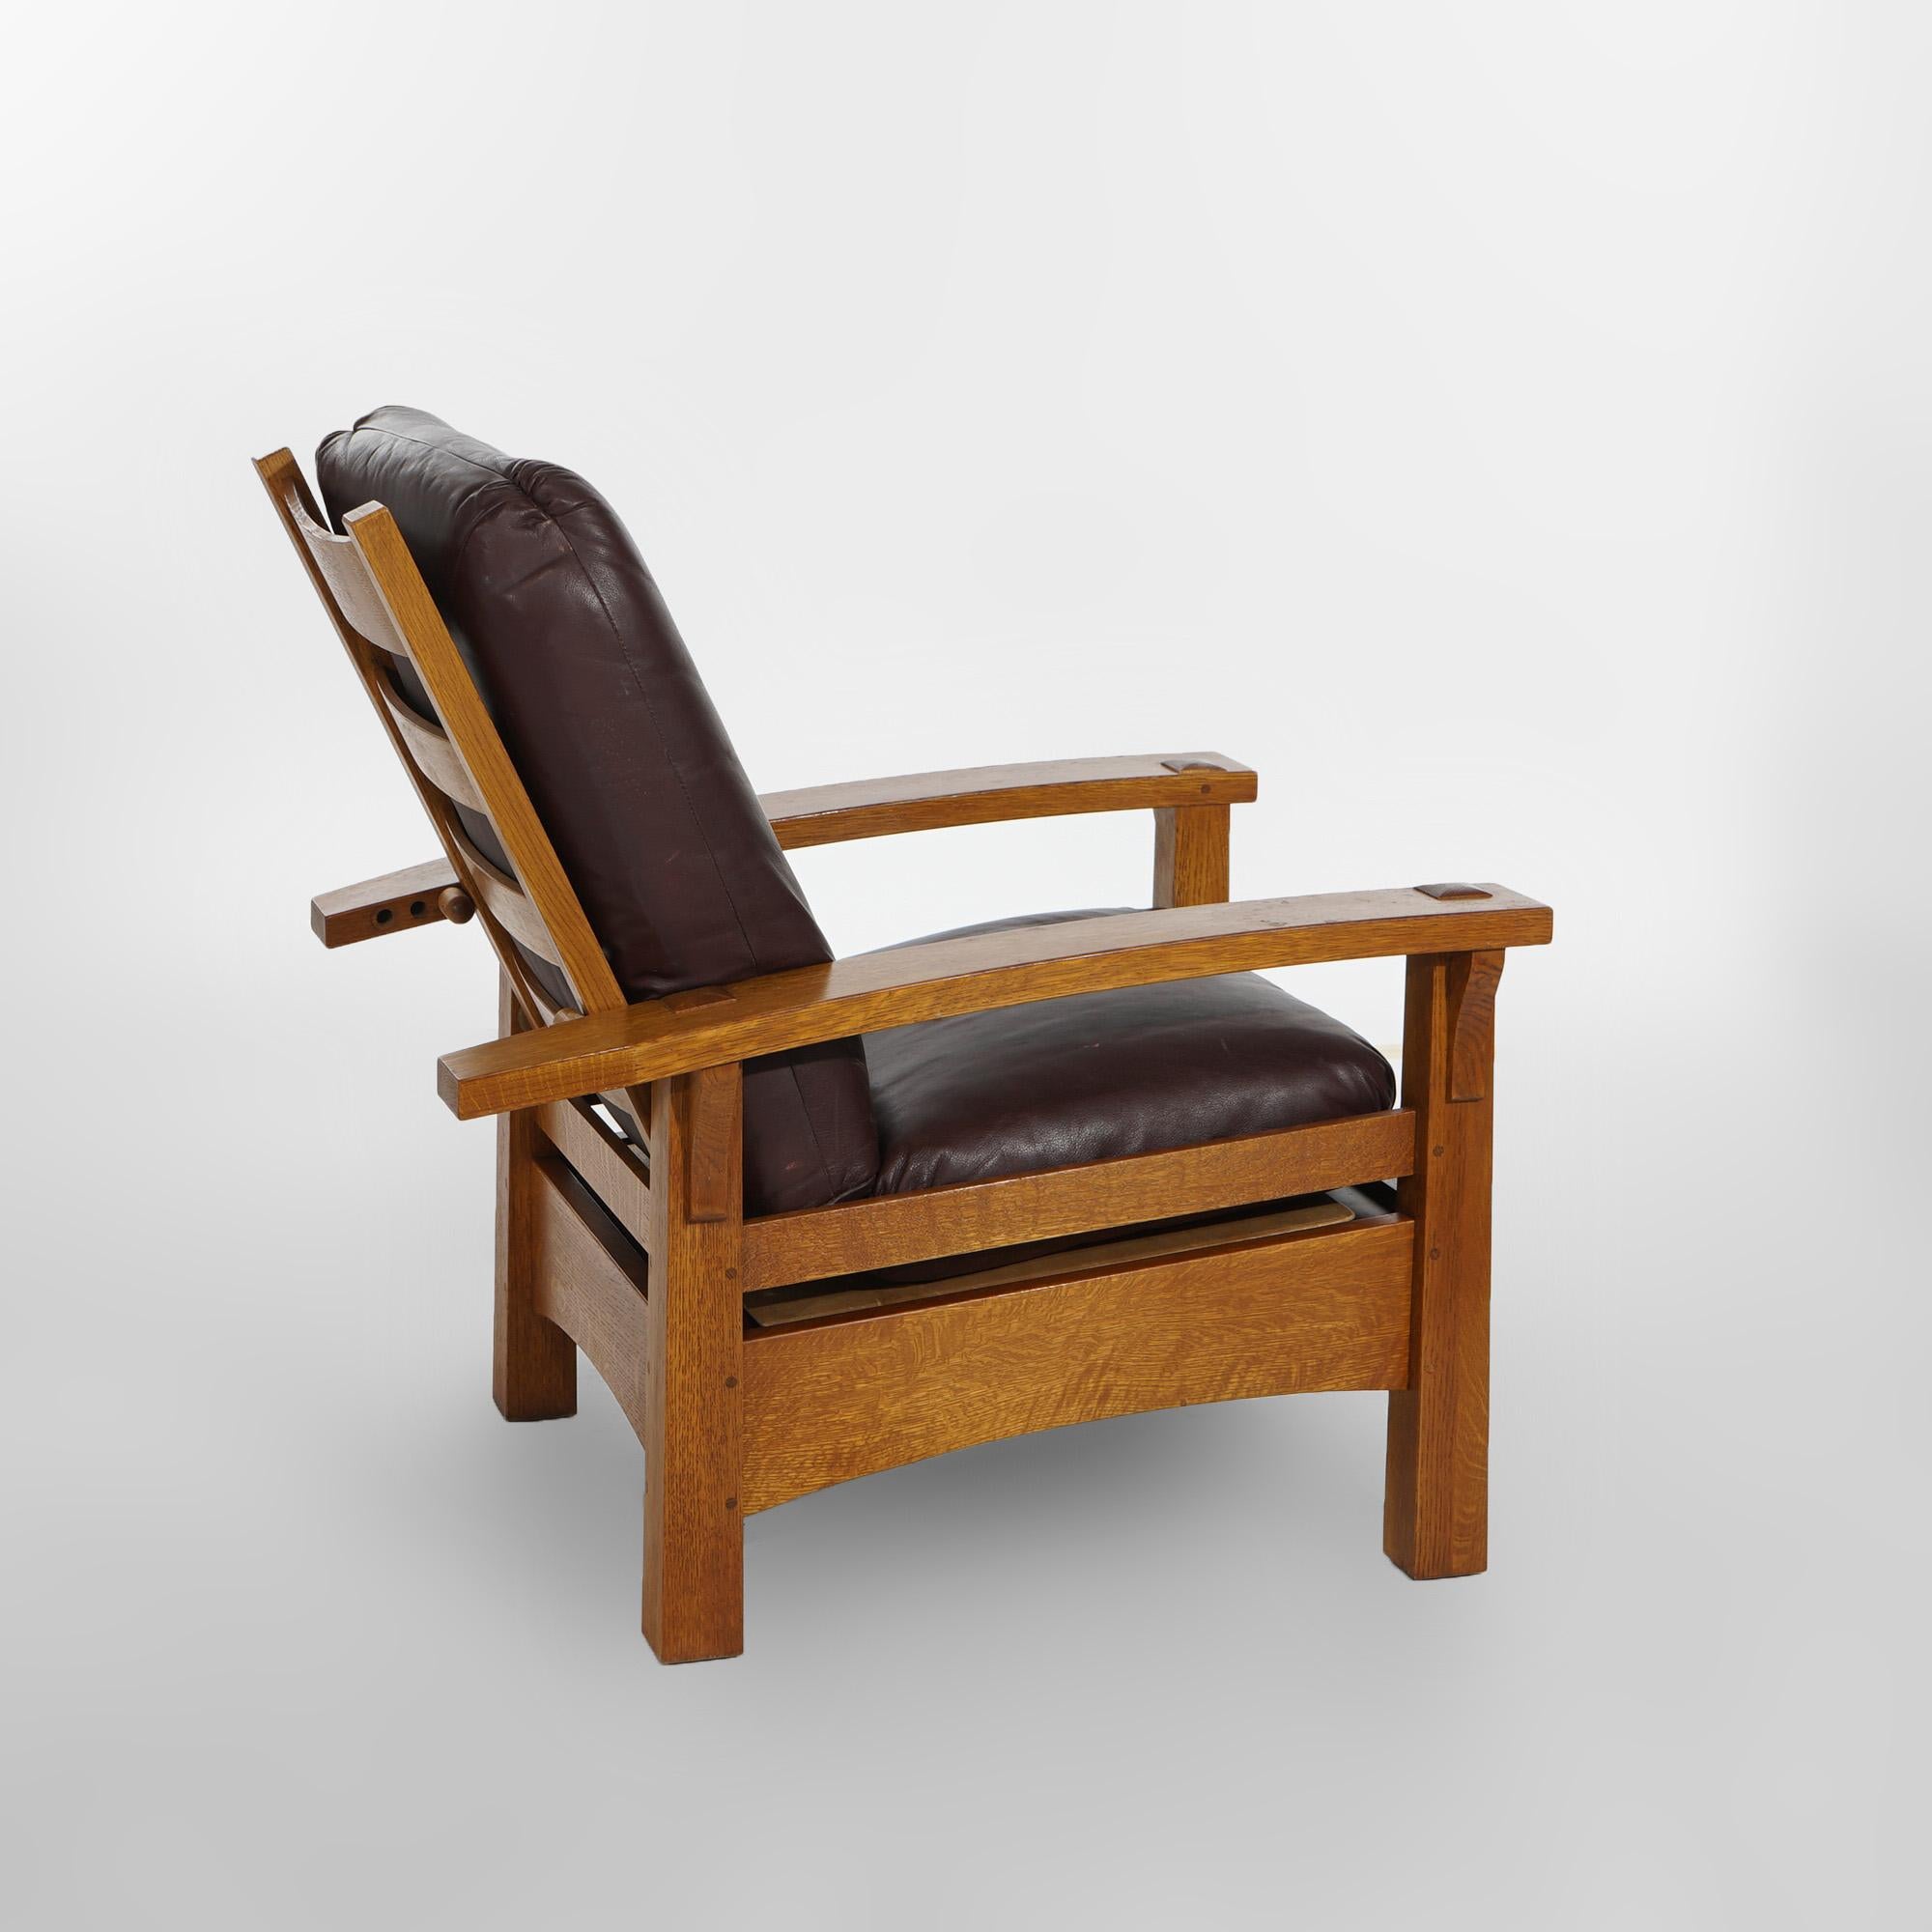 20th Century Arts & Crafts Oak Gustav Stickley Bow Arm Morris Chair With Reverse Tapered Legs